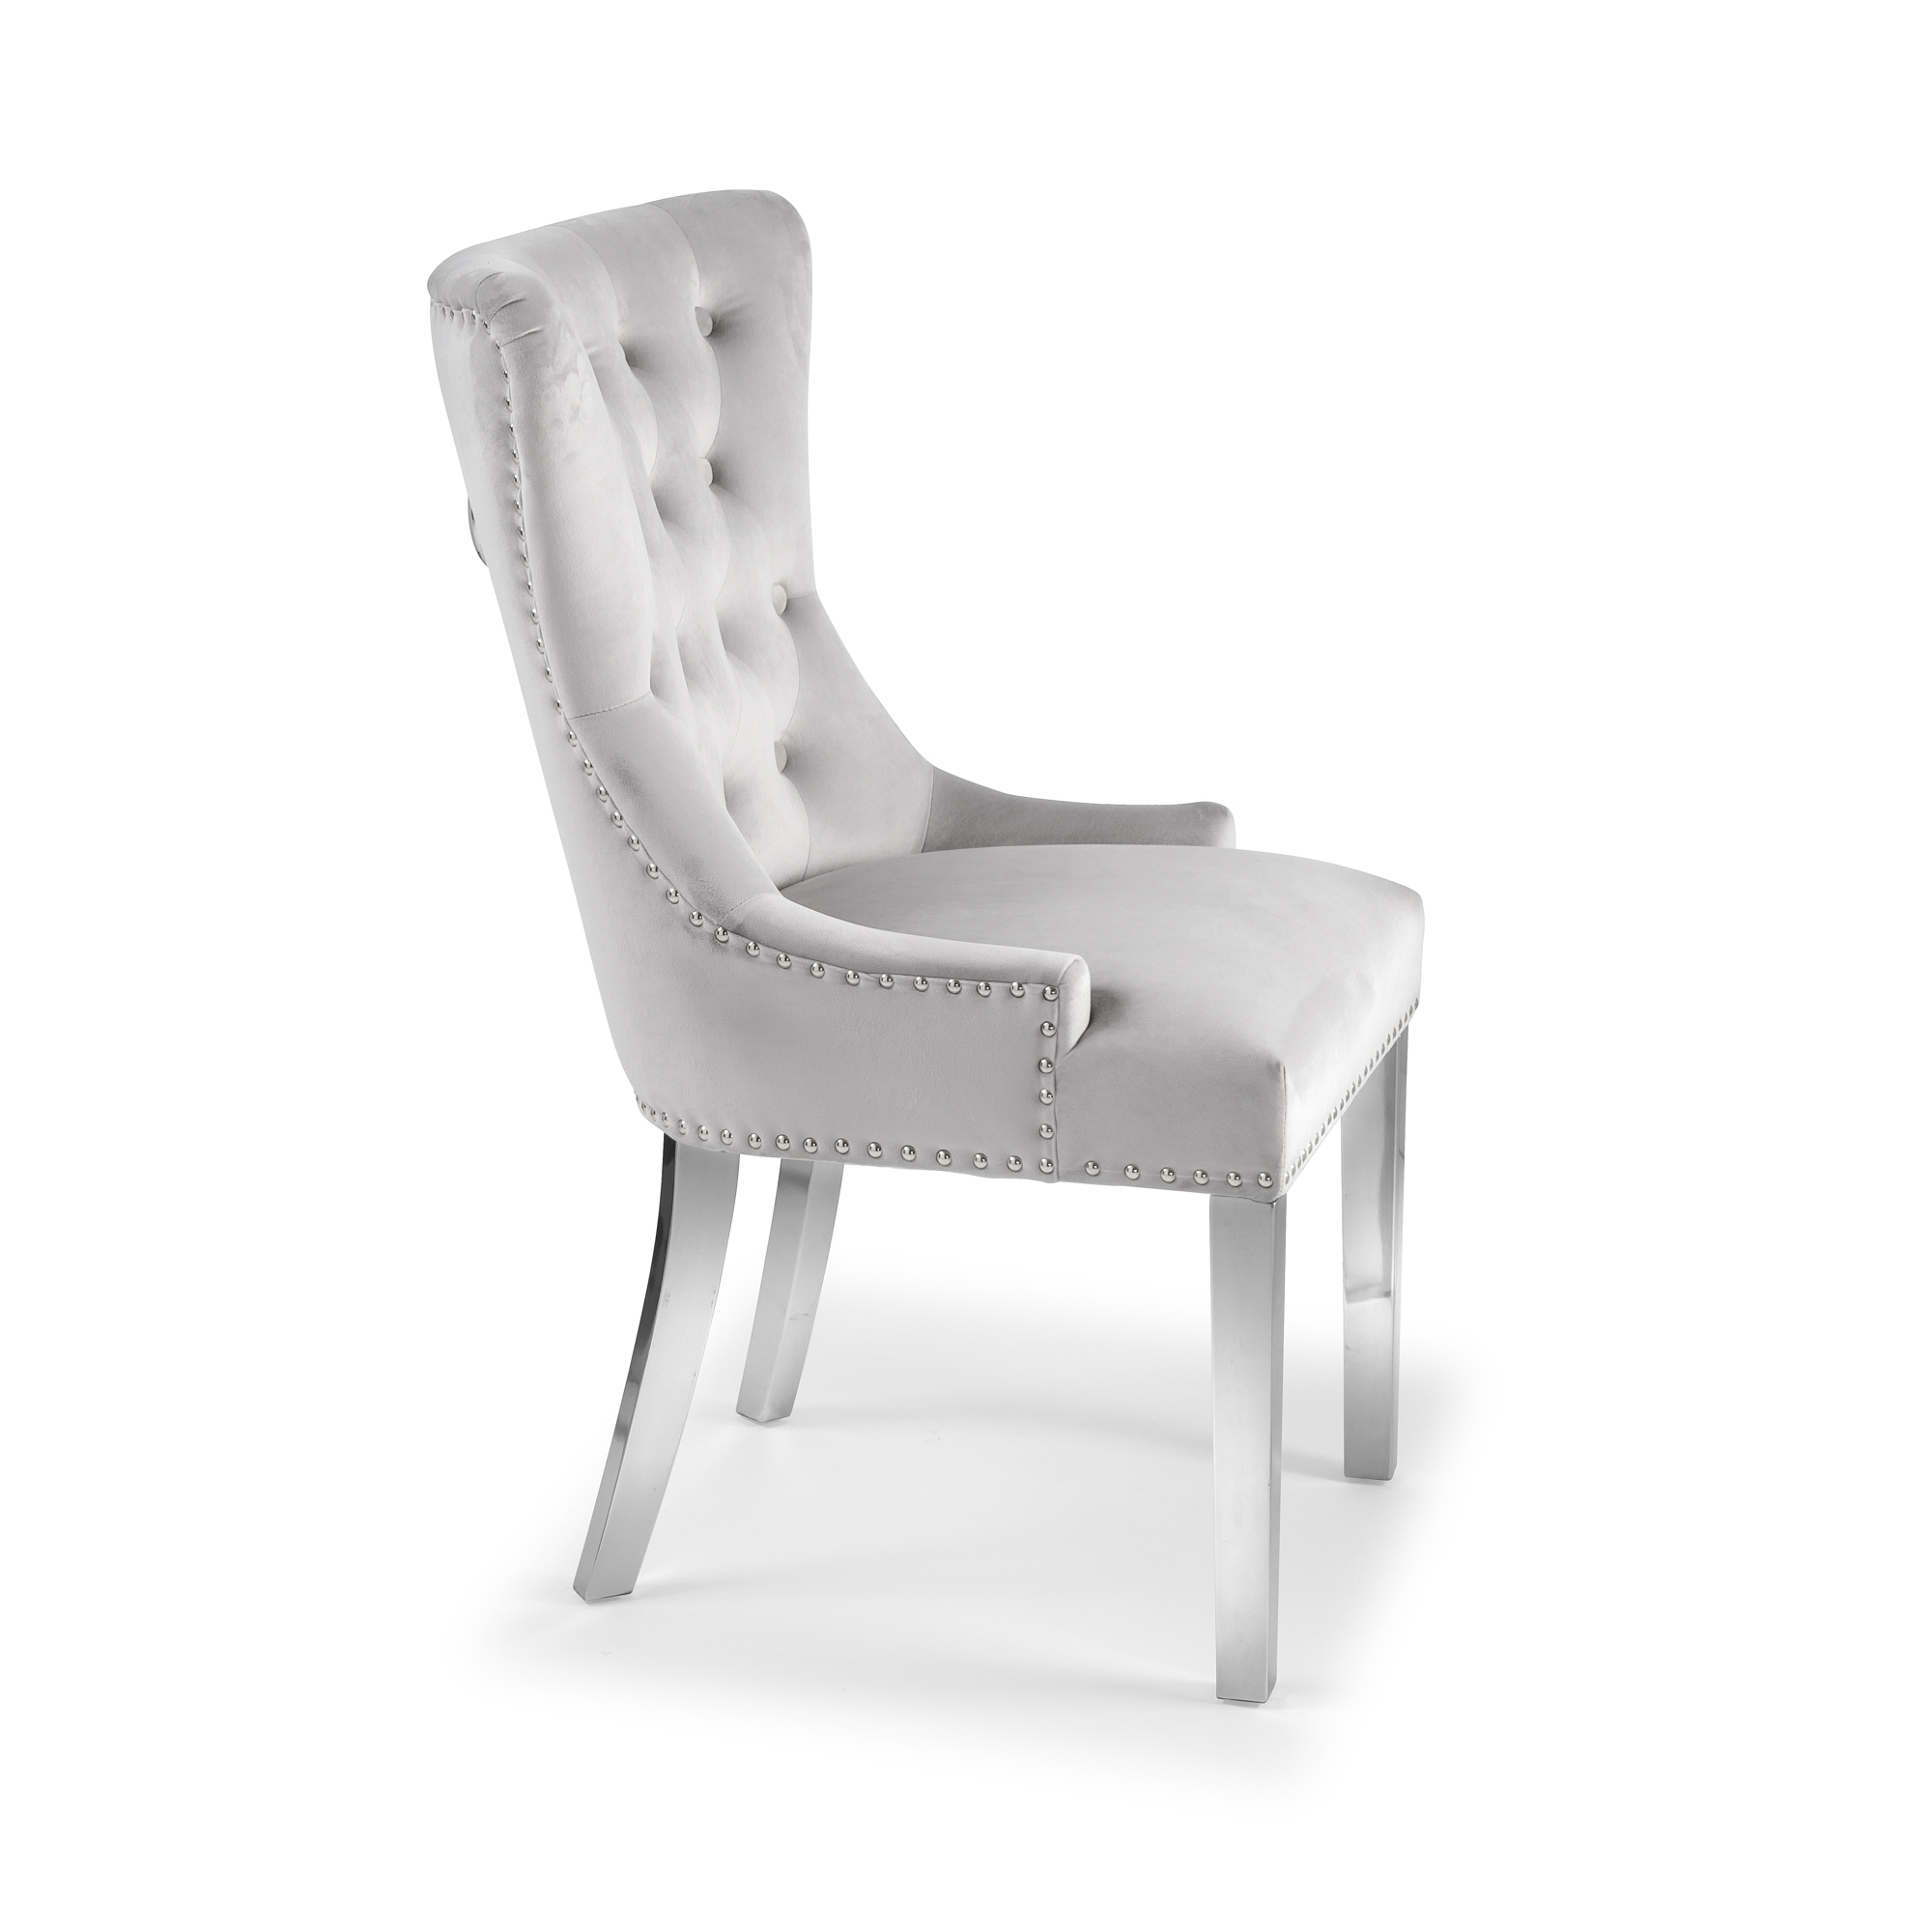 Dove Grey Brushed Velvet Dining Chair with Polished Steel Legs – Set of